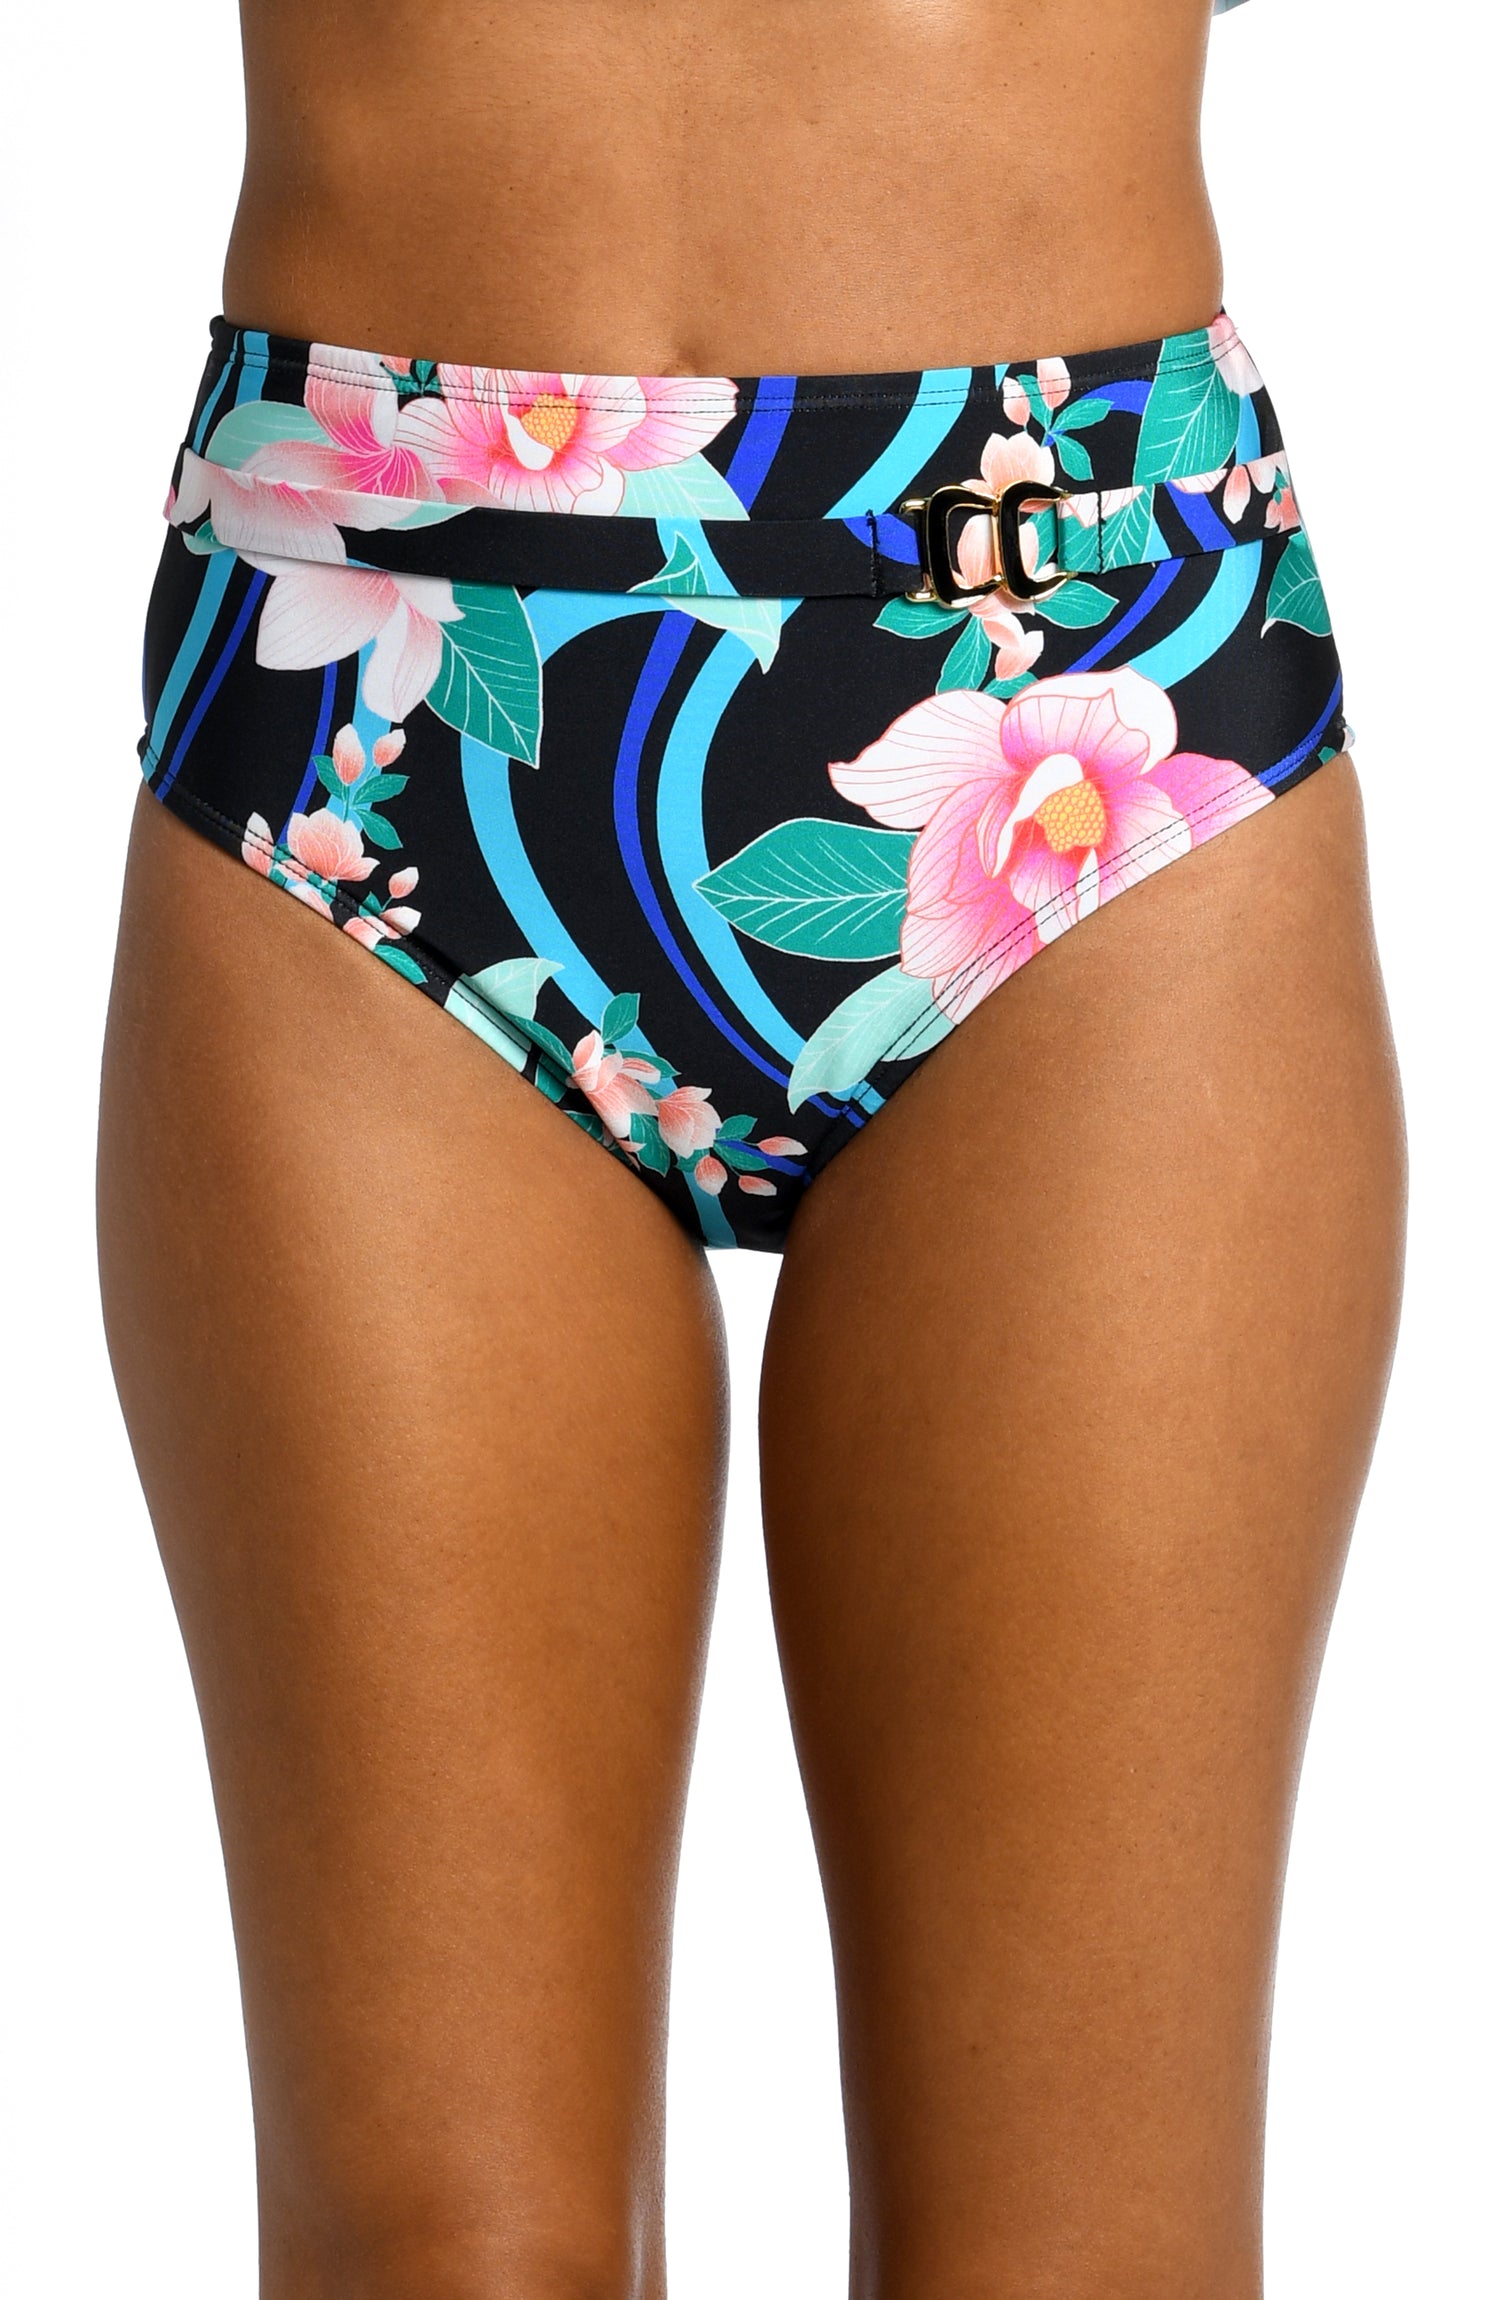 Model is wearing pink multi colored tropical foral print on this high waist bottom from our Nightfall Blooms collection!